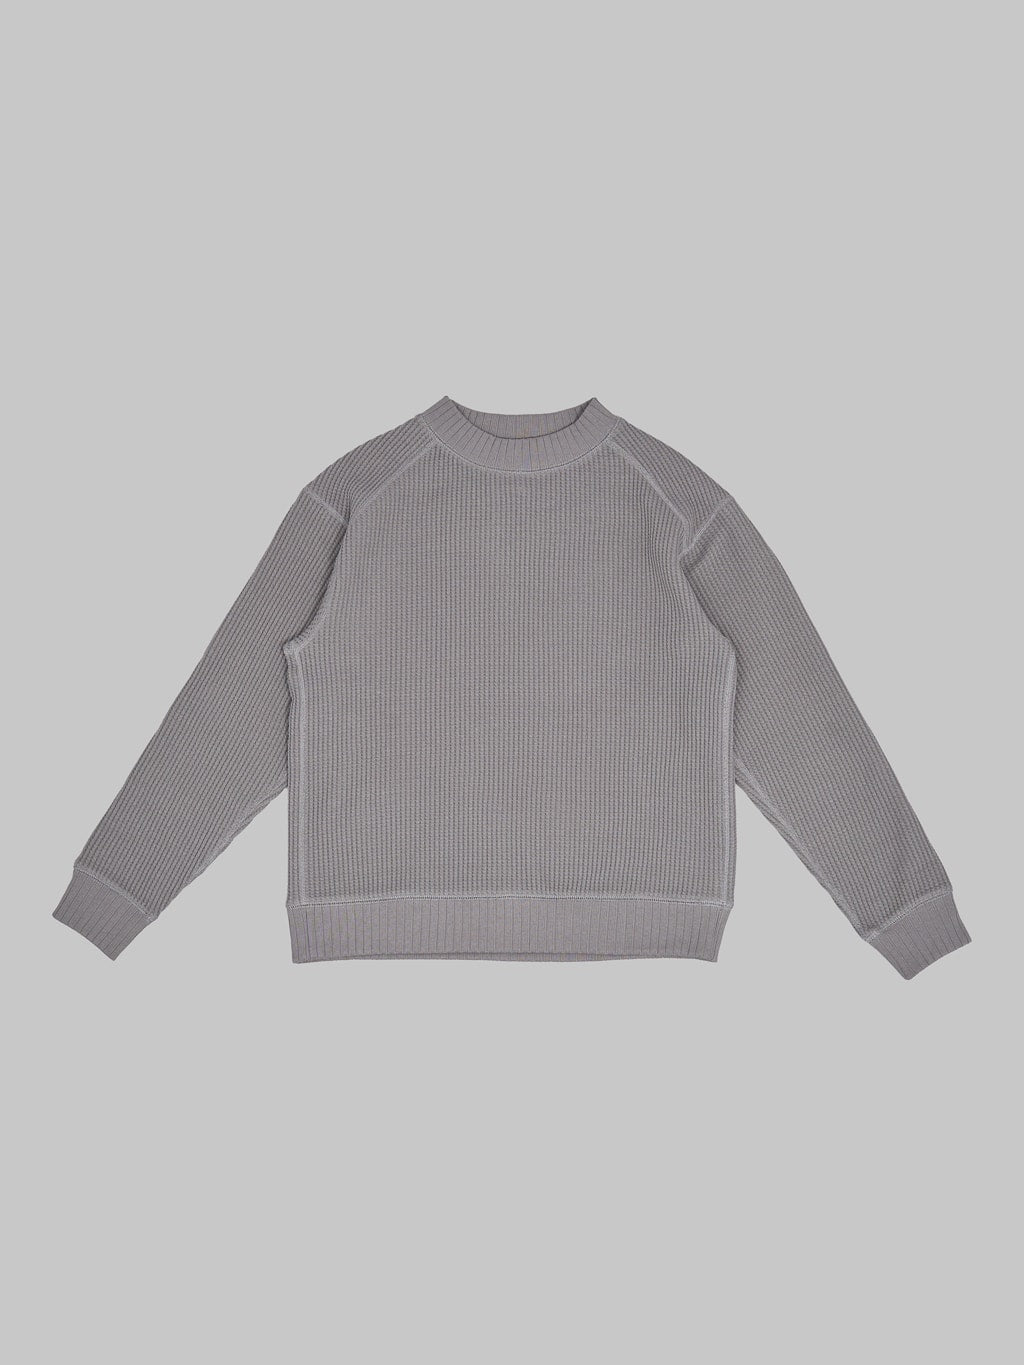 Jackman Waffle Midneck Sweater Iron Grey front view